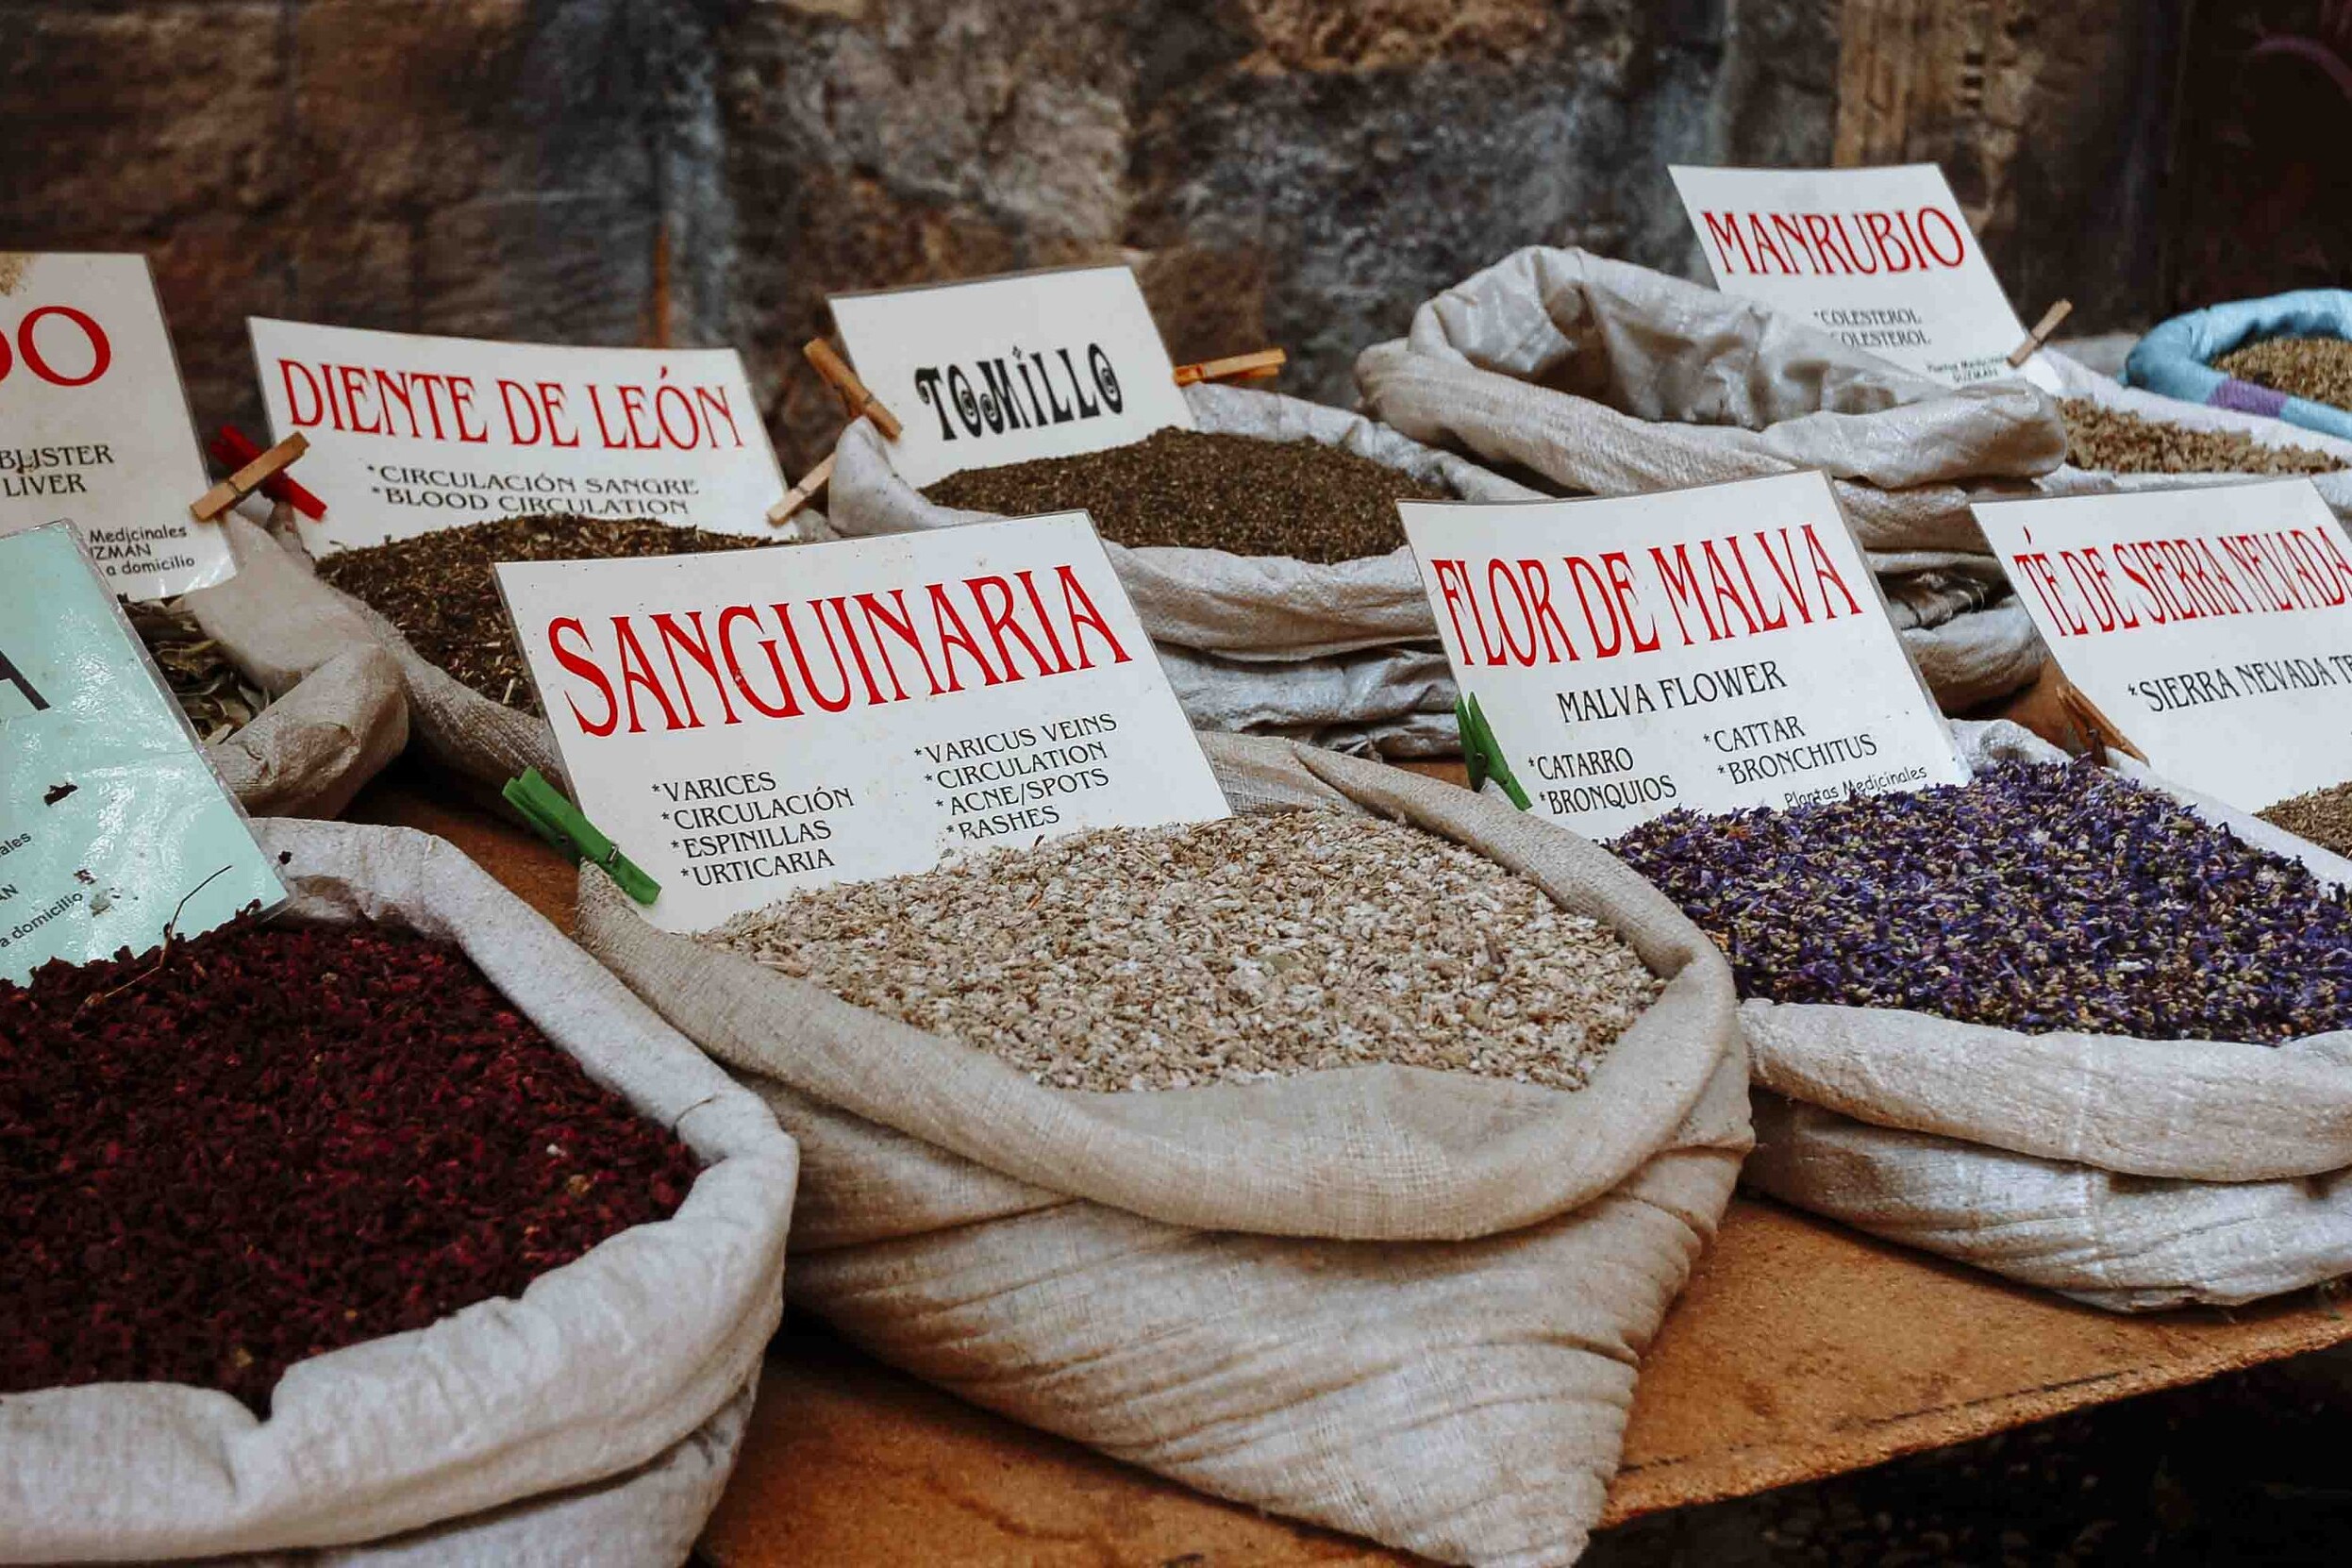 Spices on display in a granada market on day trips from seville to granada